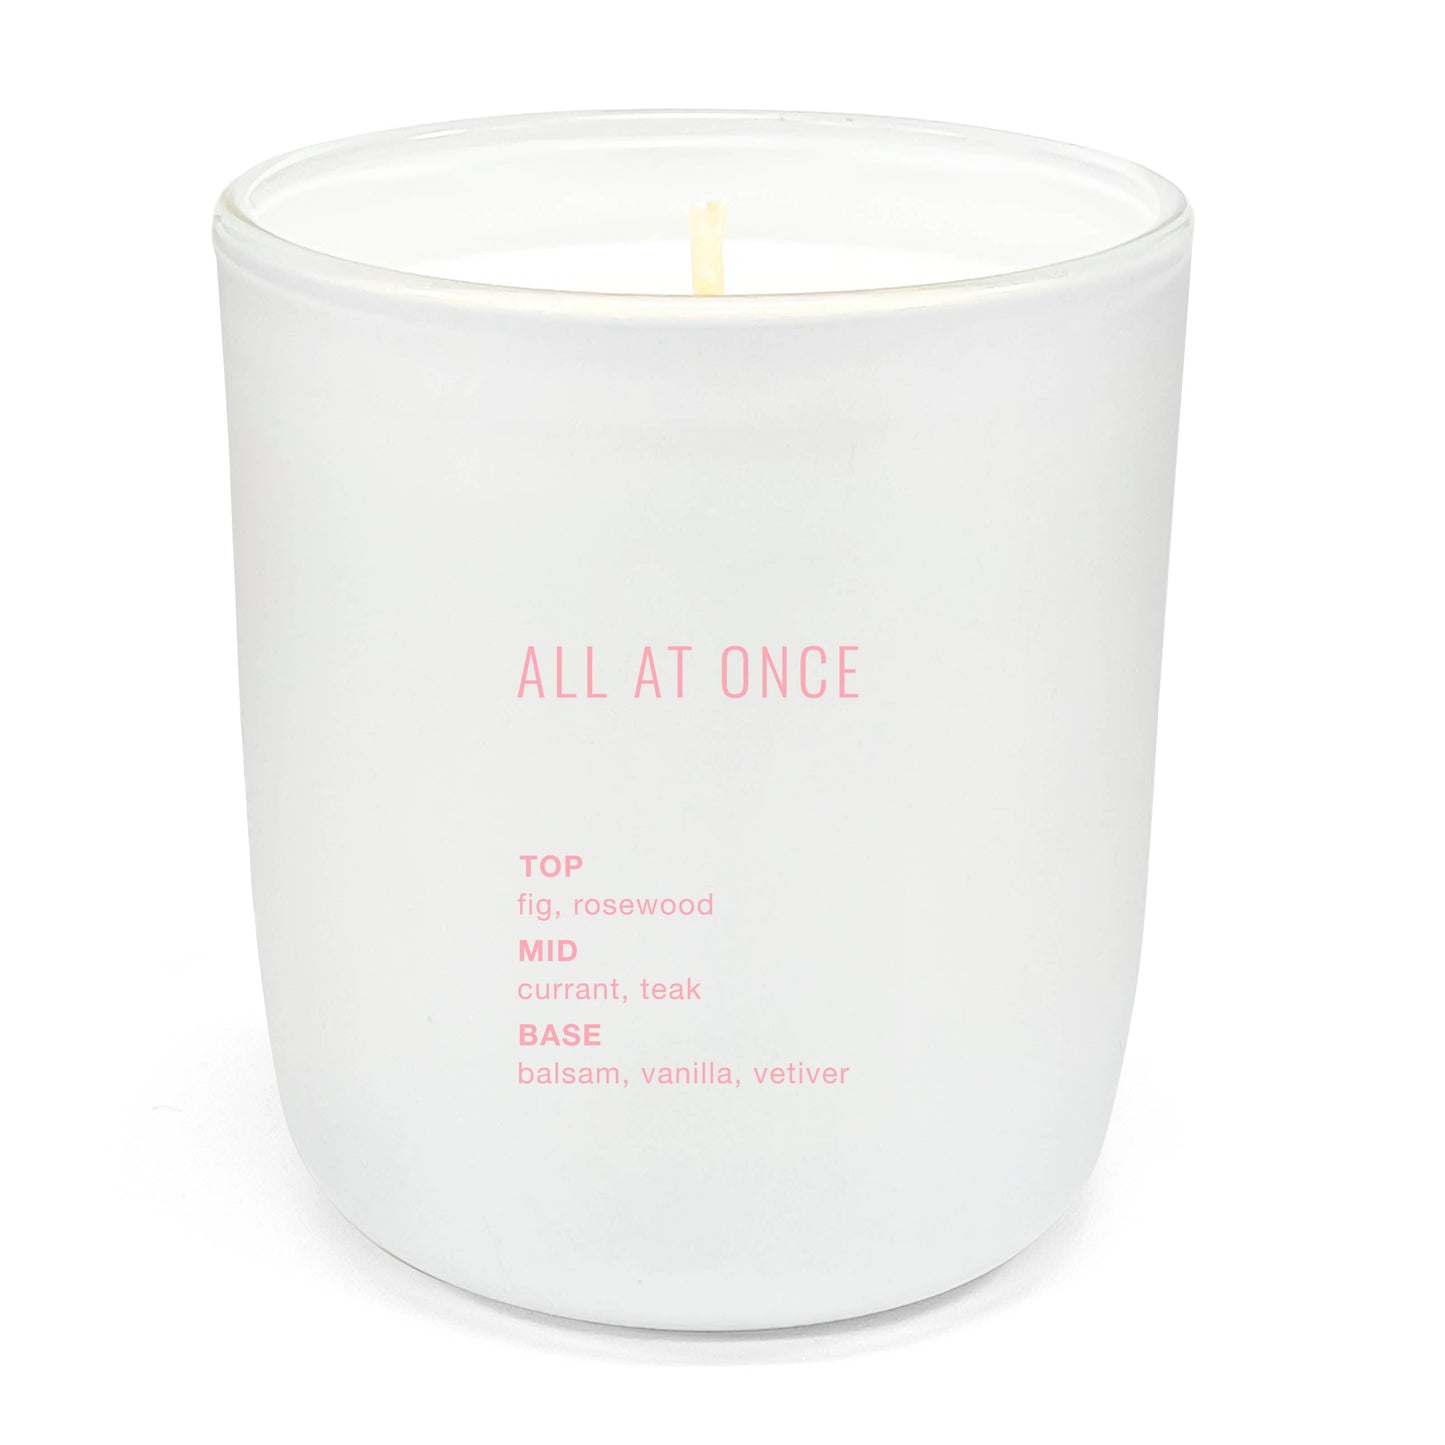 All at Once Signature Candle